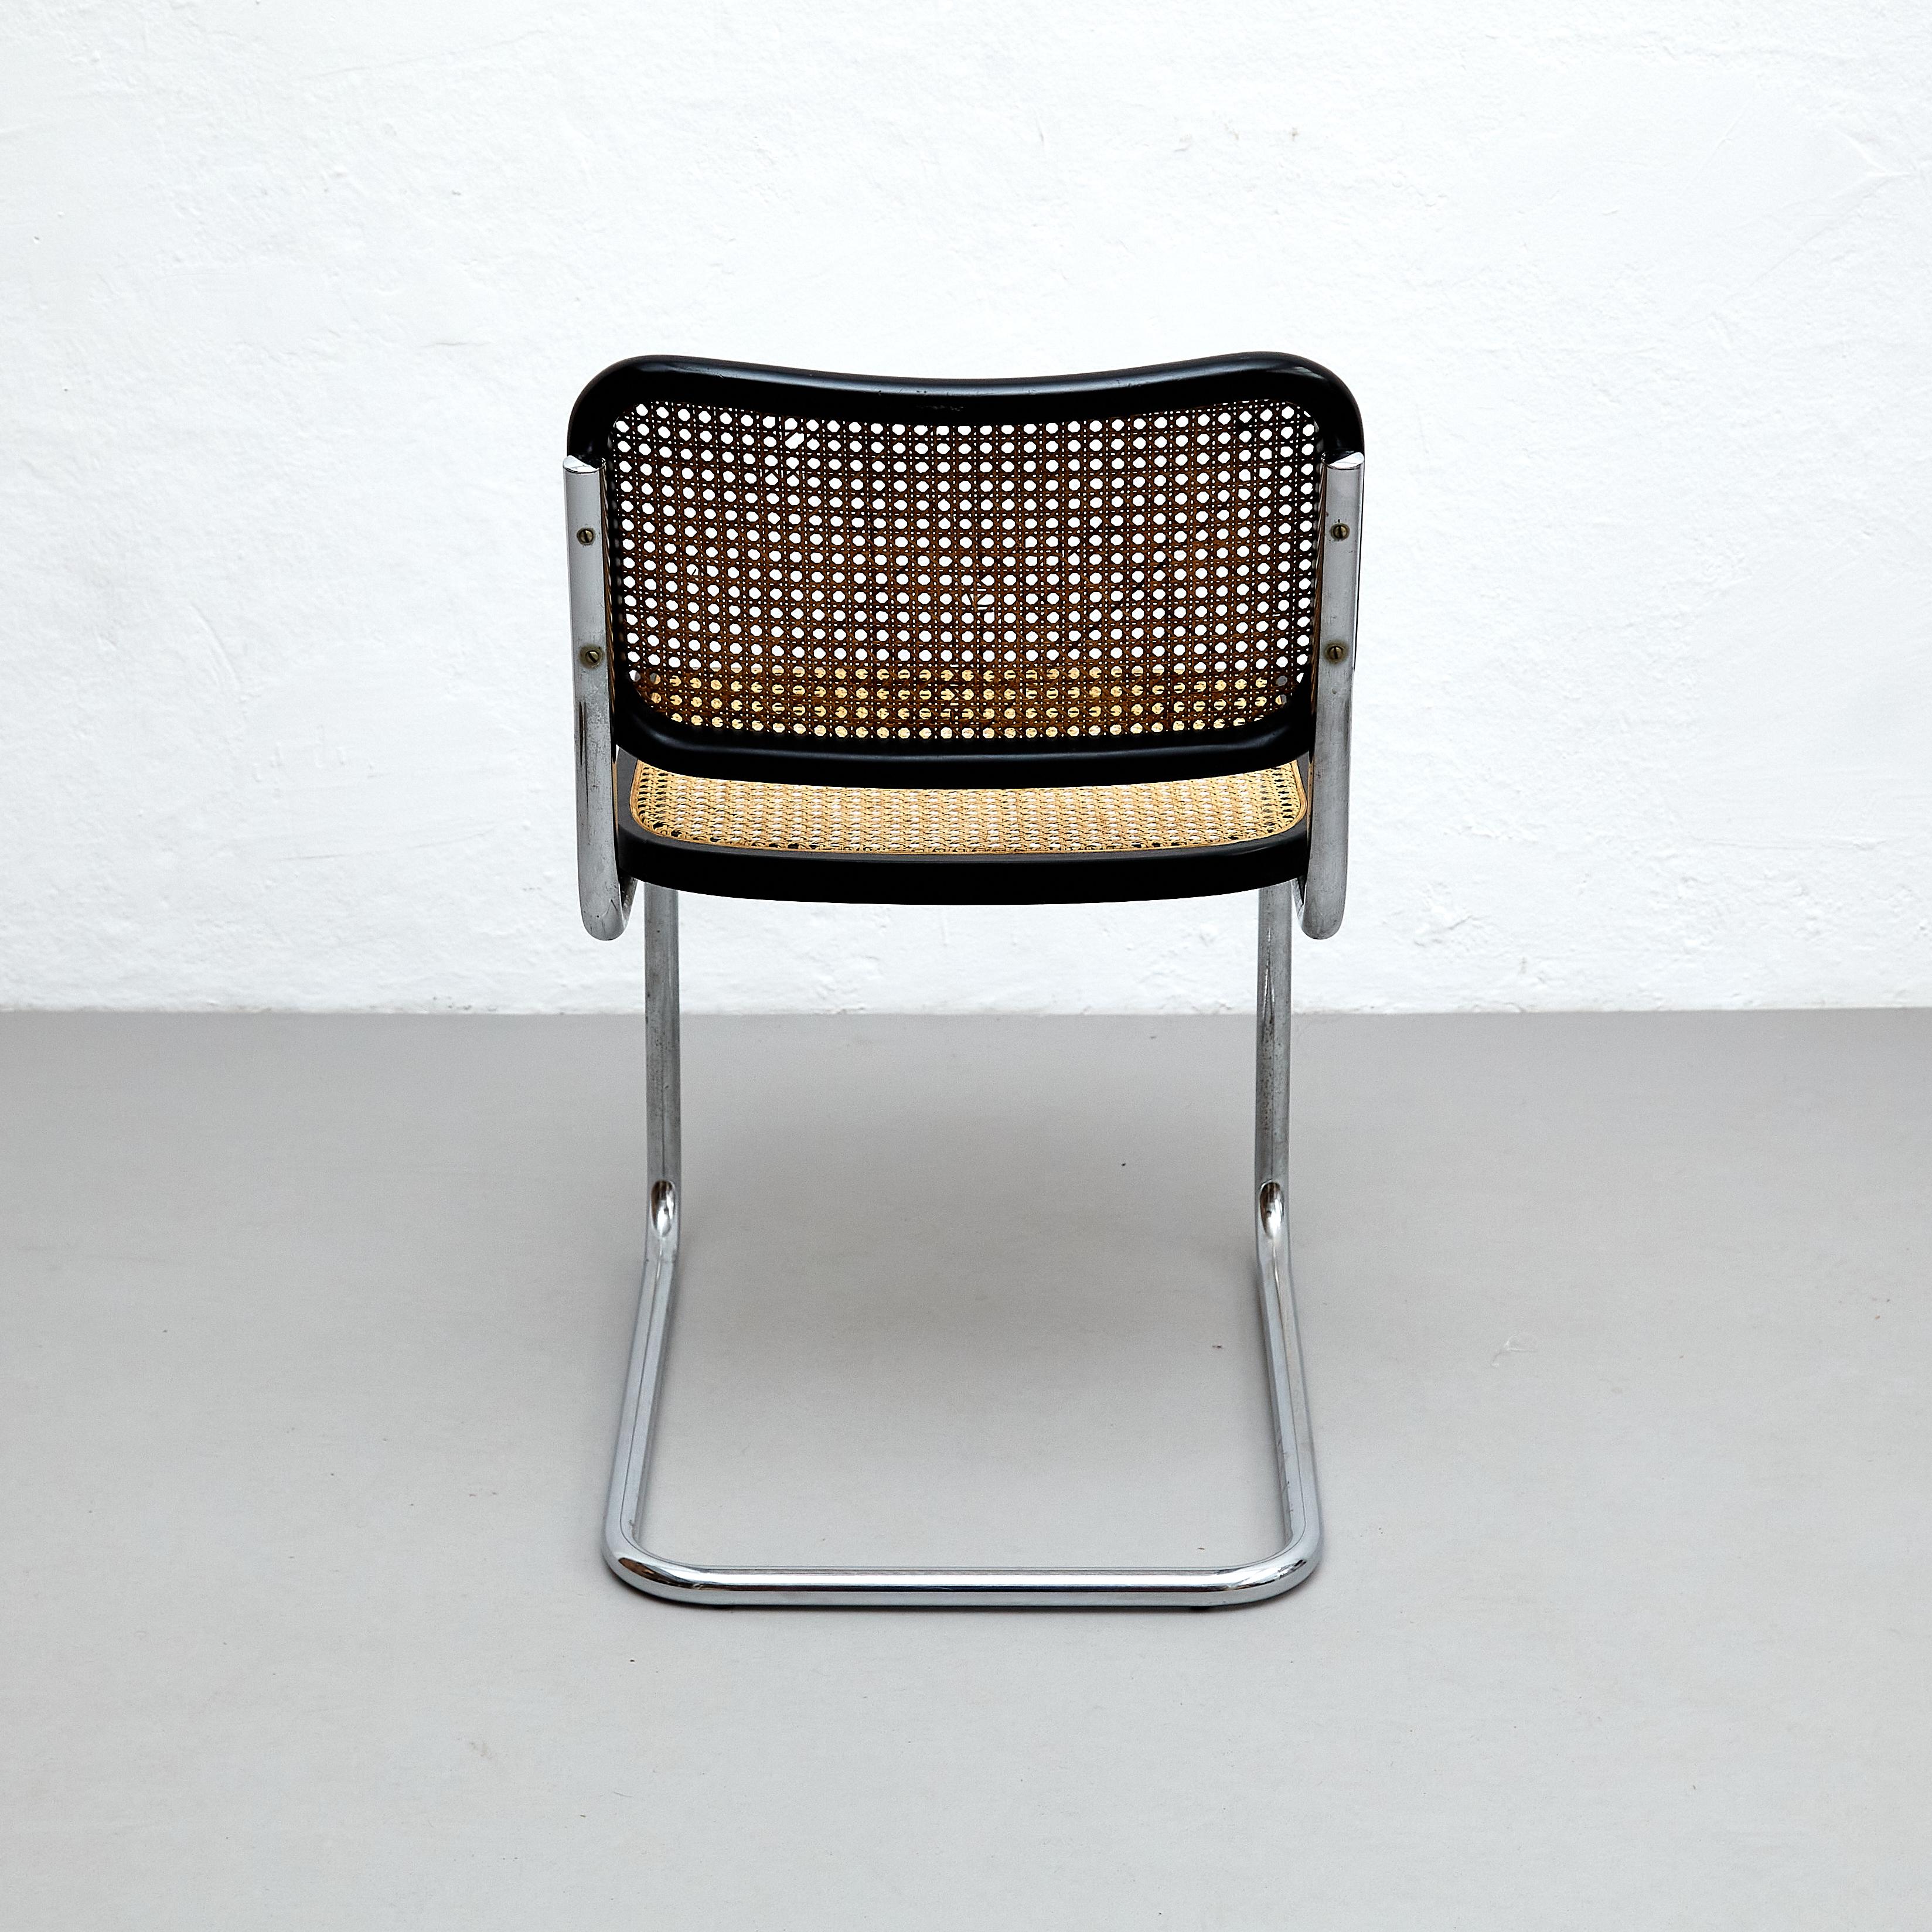 Set of 4 Marcel Breuer Cesca Metal and Wood Mid-Century Modern Chairs, C. 1960 In Good Condition For Sale In Barcelona, Barcelona